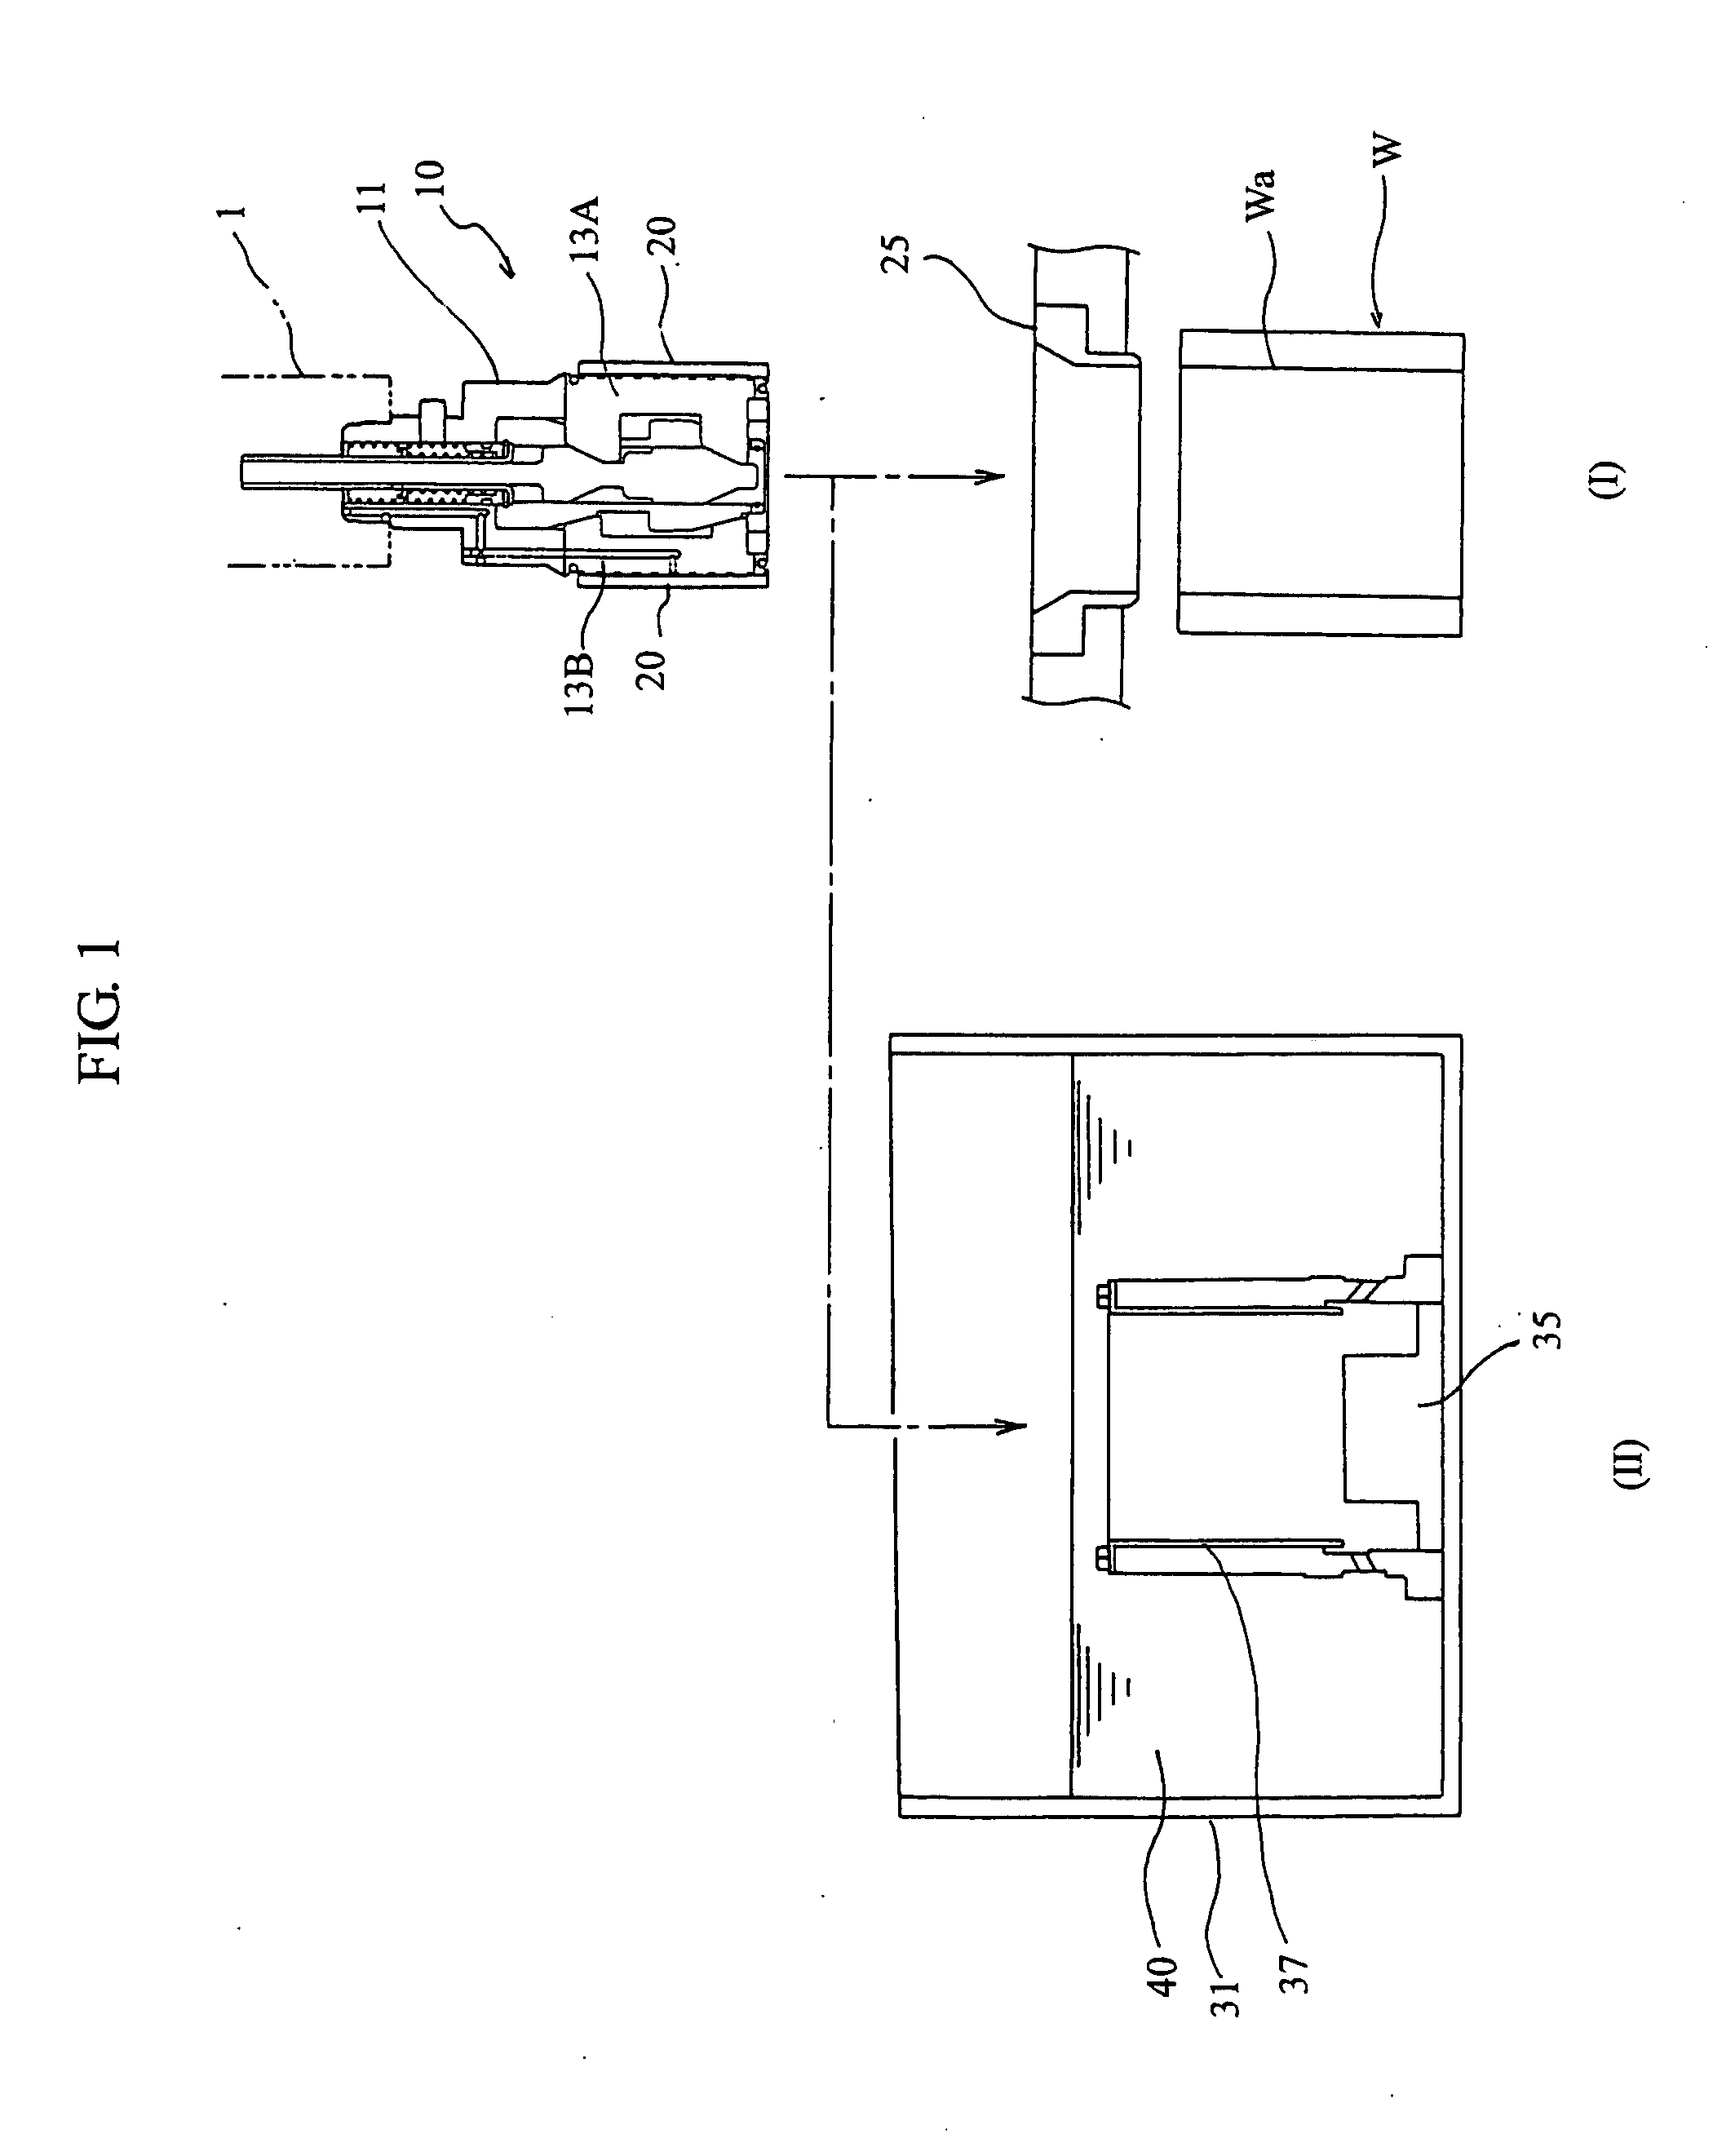 Process and apparatus for grinding with electrolytic dressing